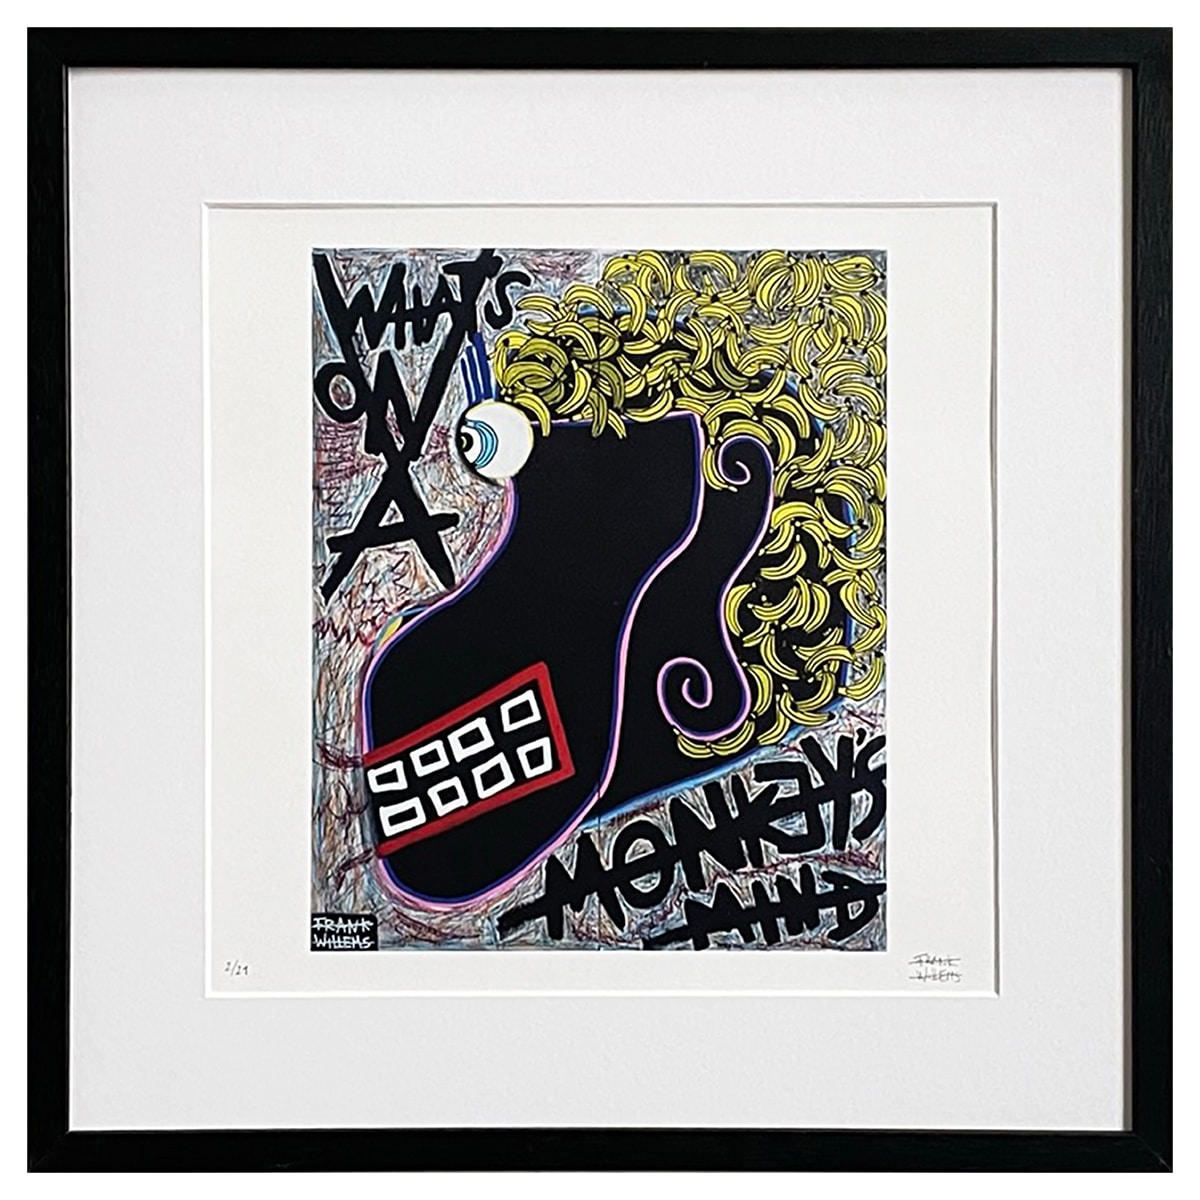 Limited Edt. Art Print – WHAT’S ON A MONKEY’S MIND